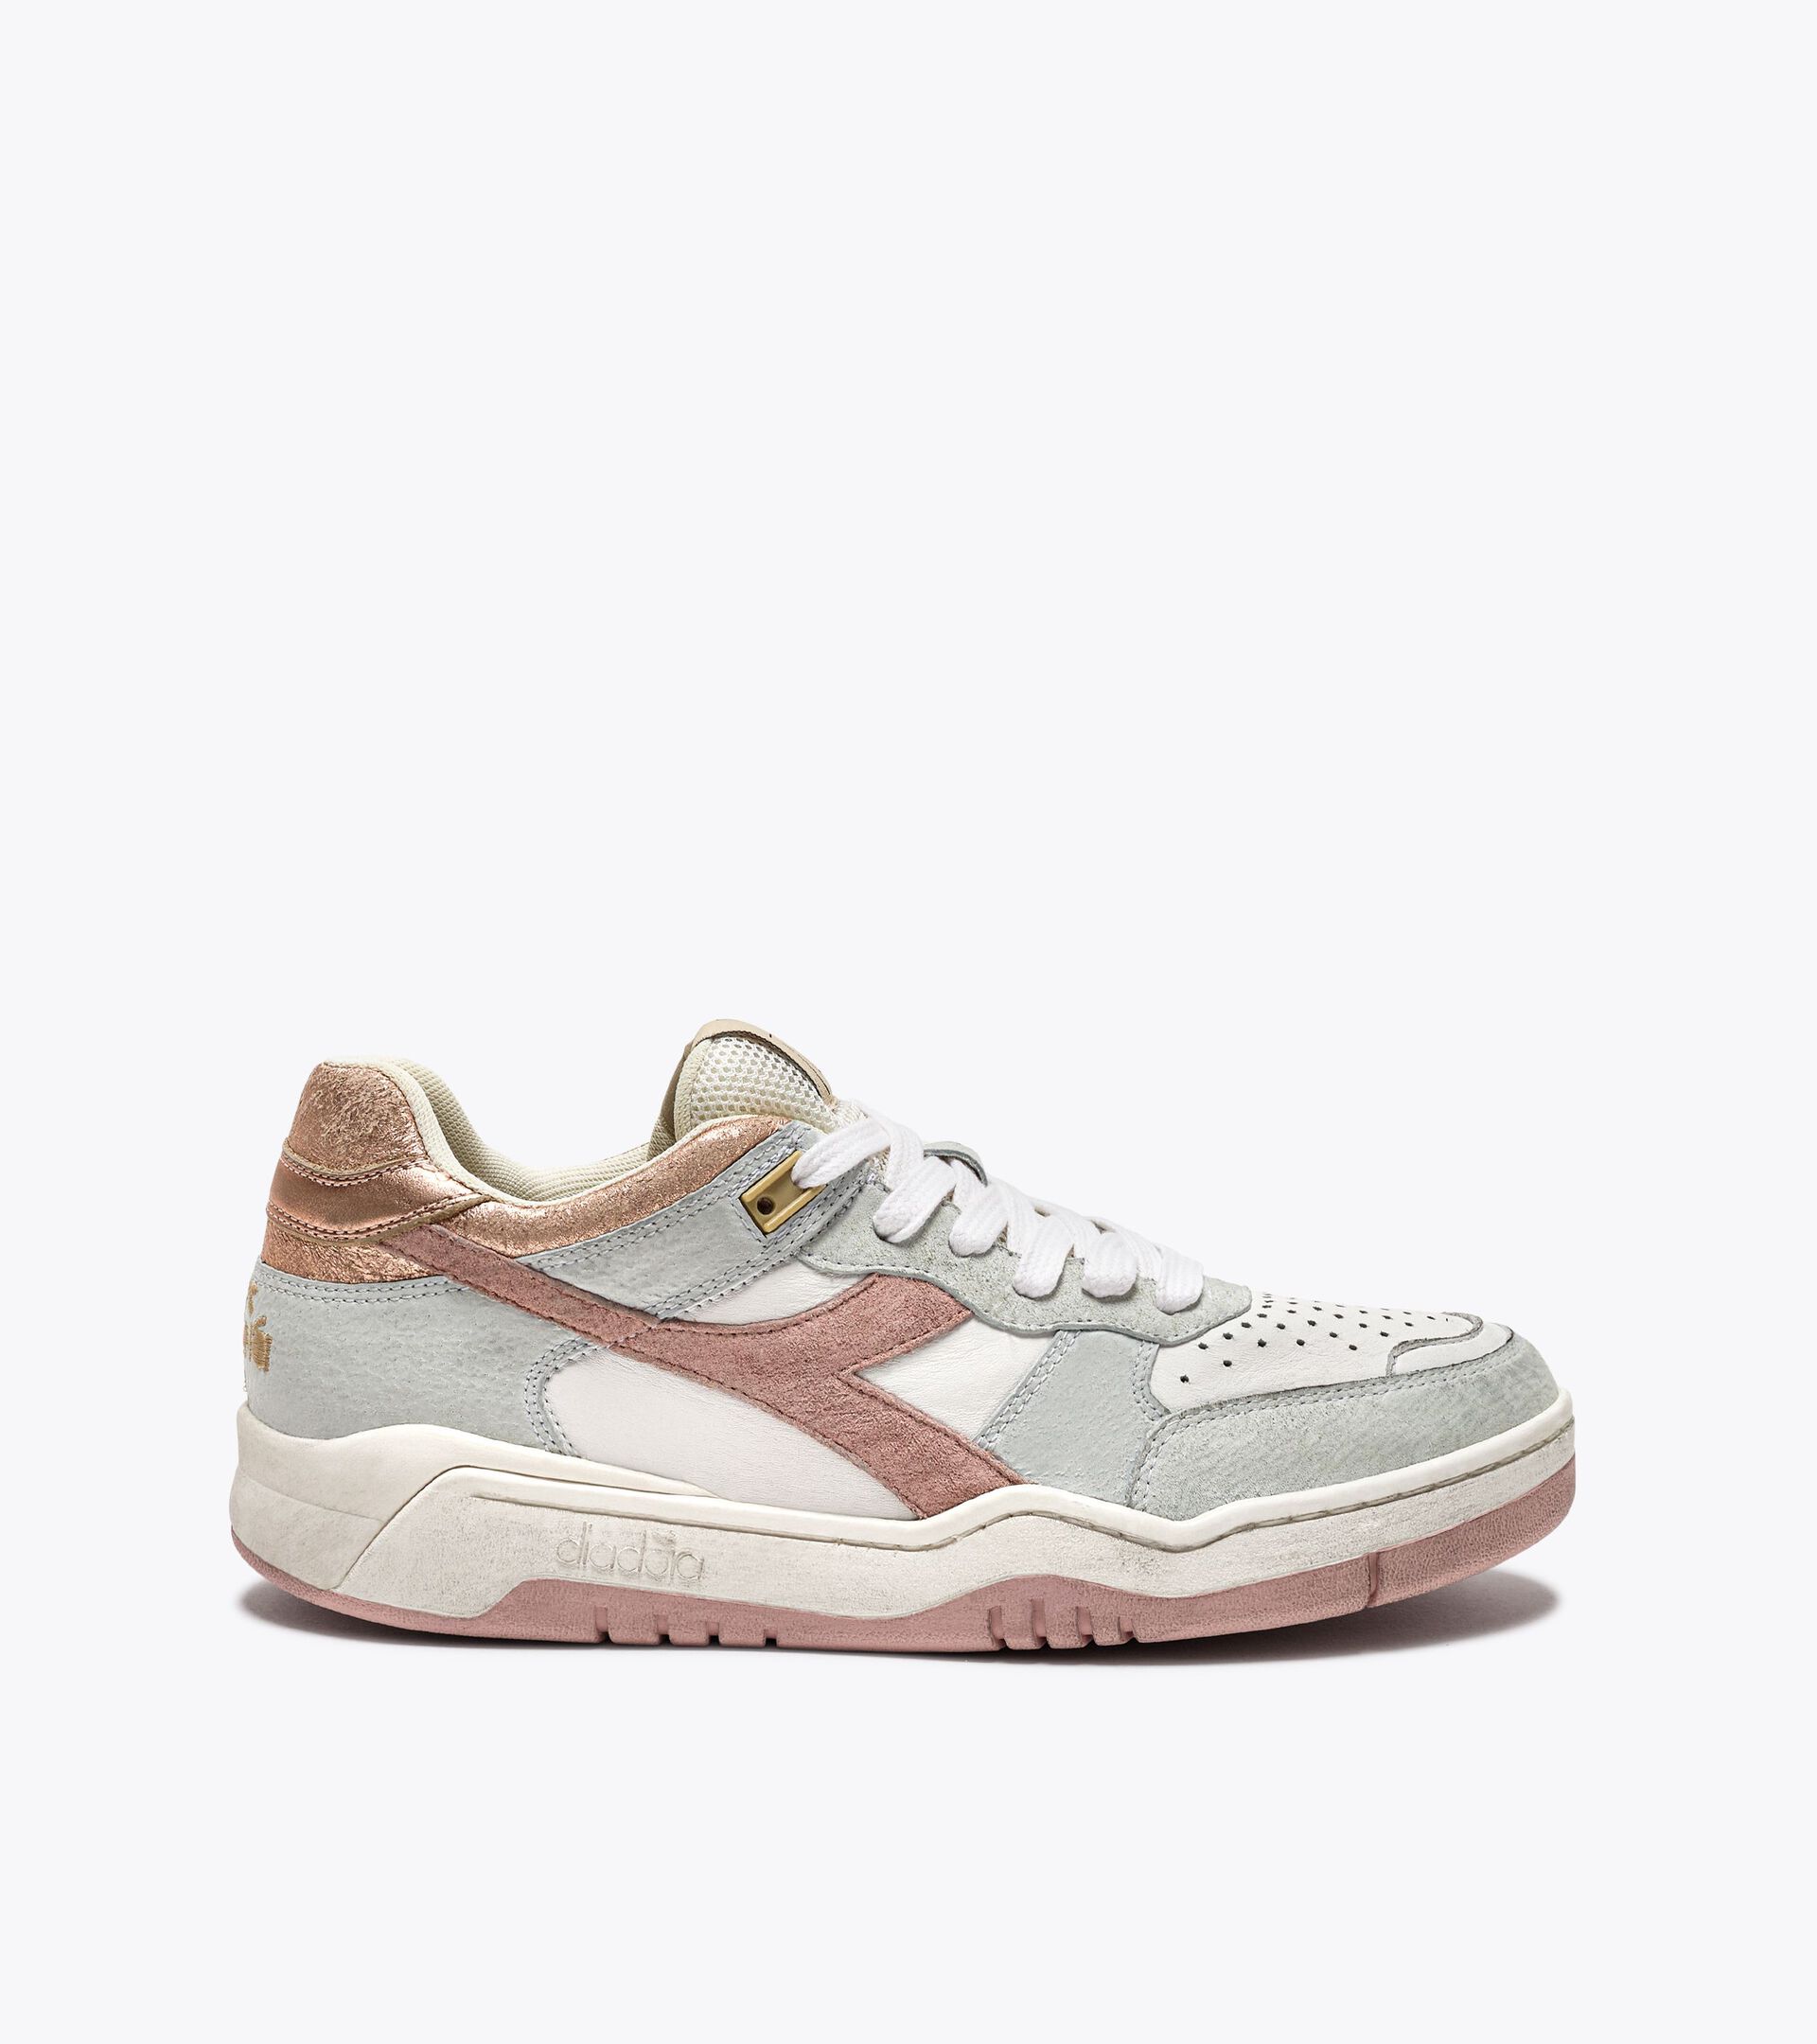 B.560 CRACKLE LAME' WN Sneaker Heritage - Donna - Diadora Online Store US